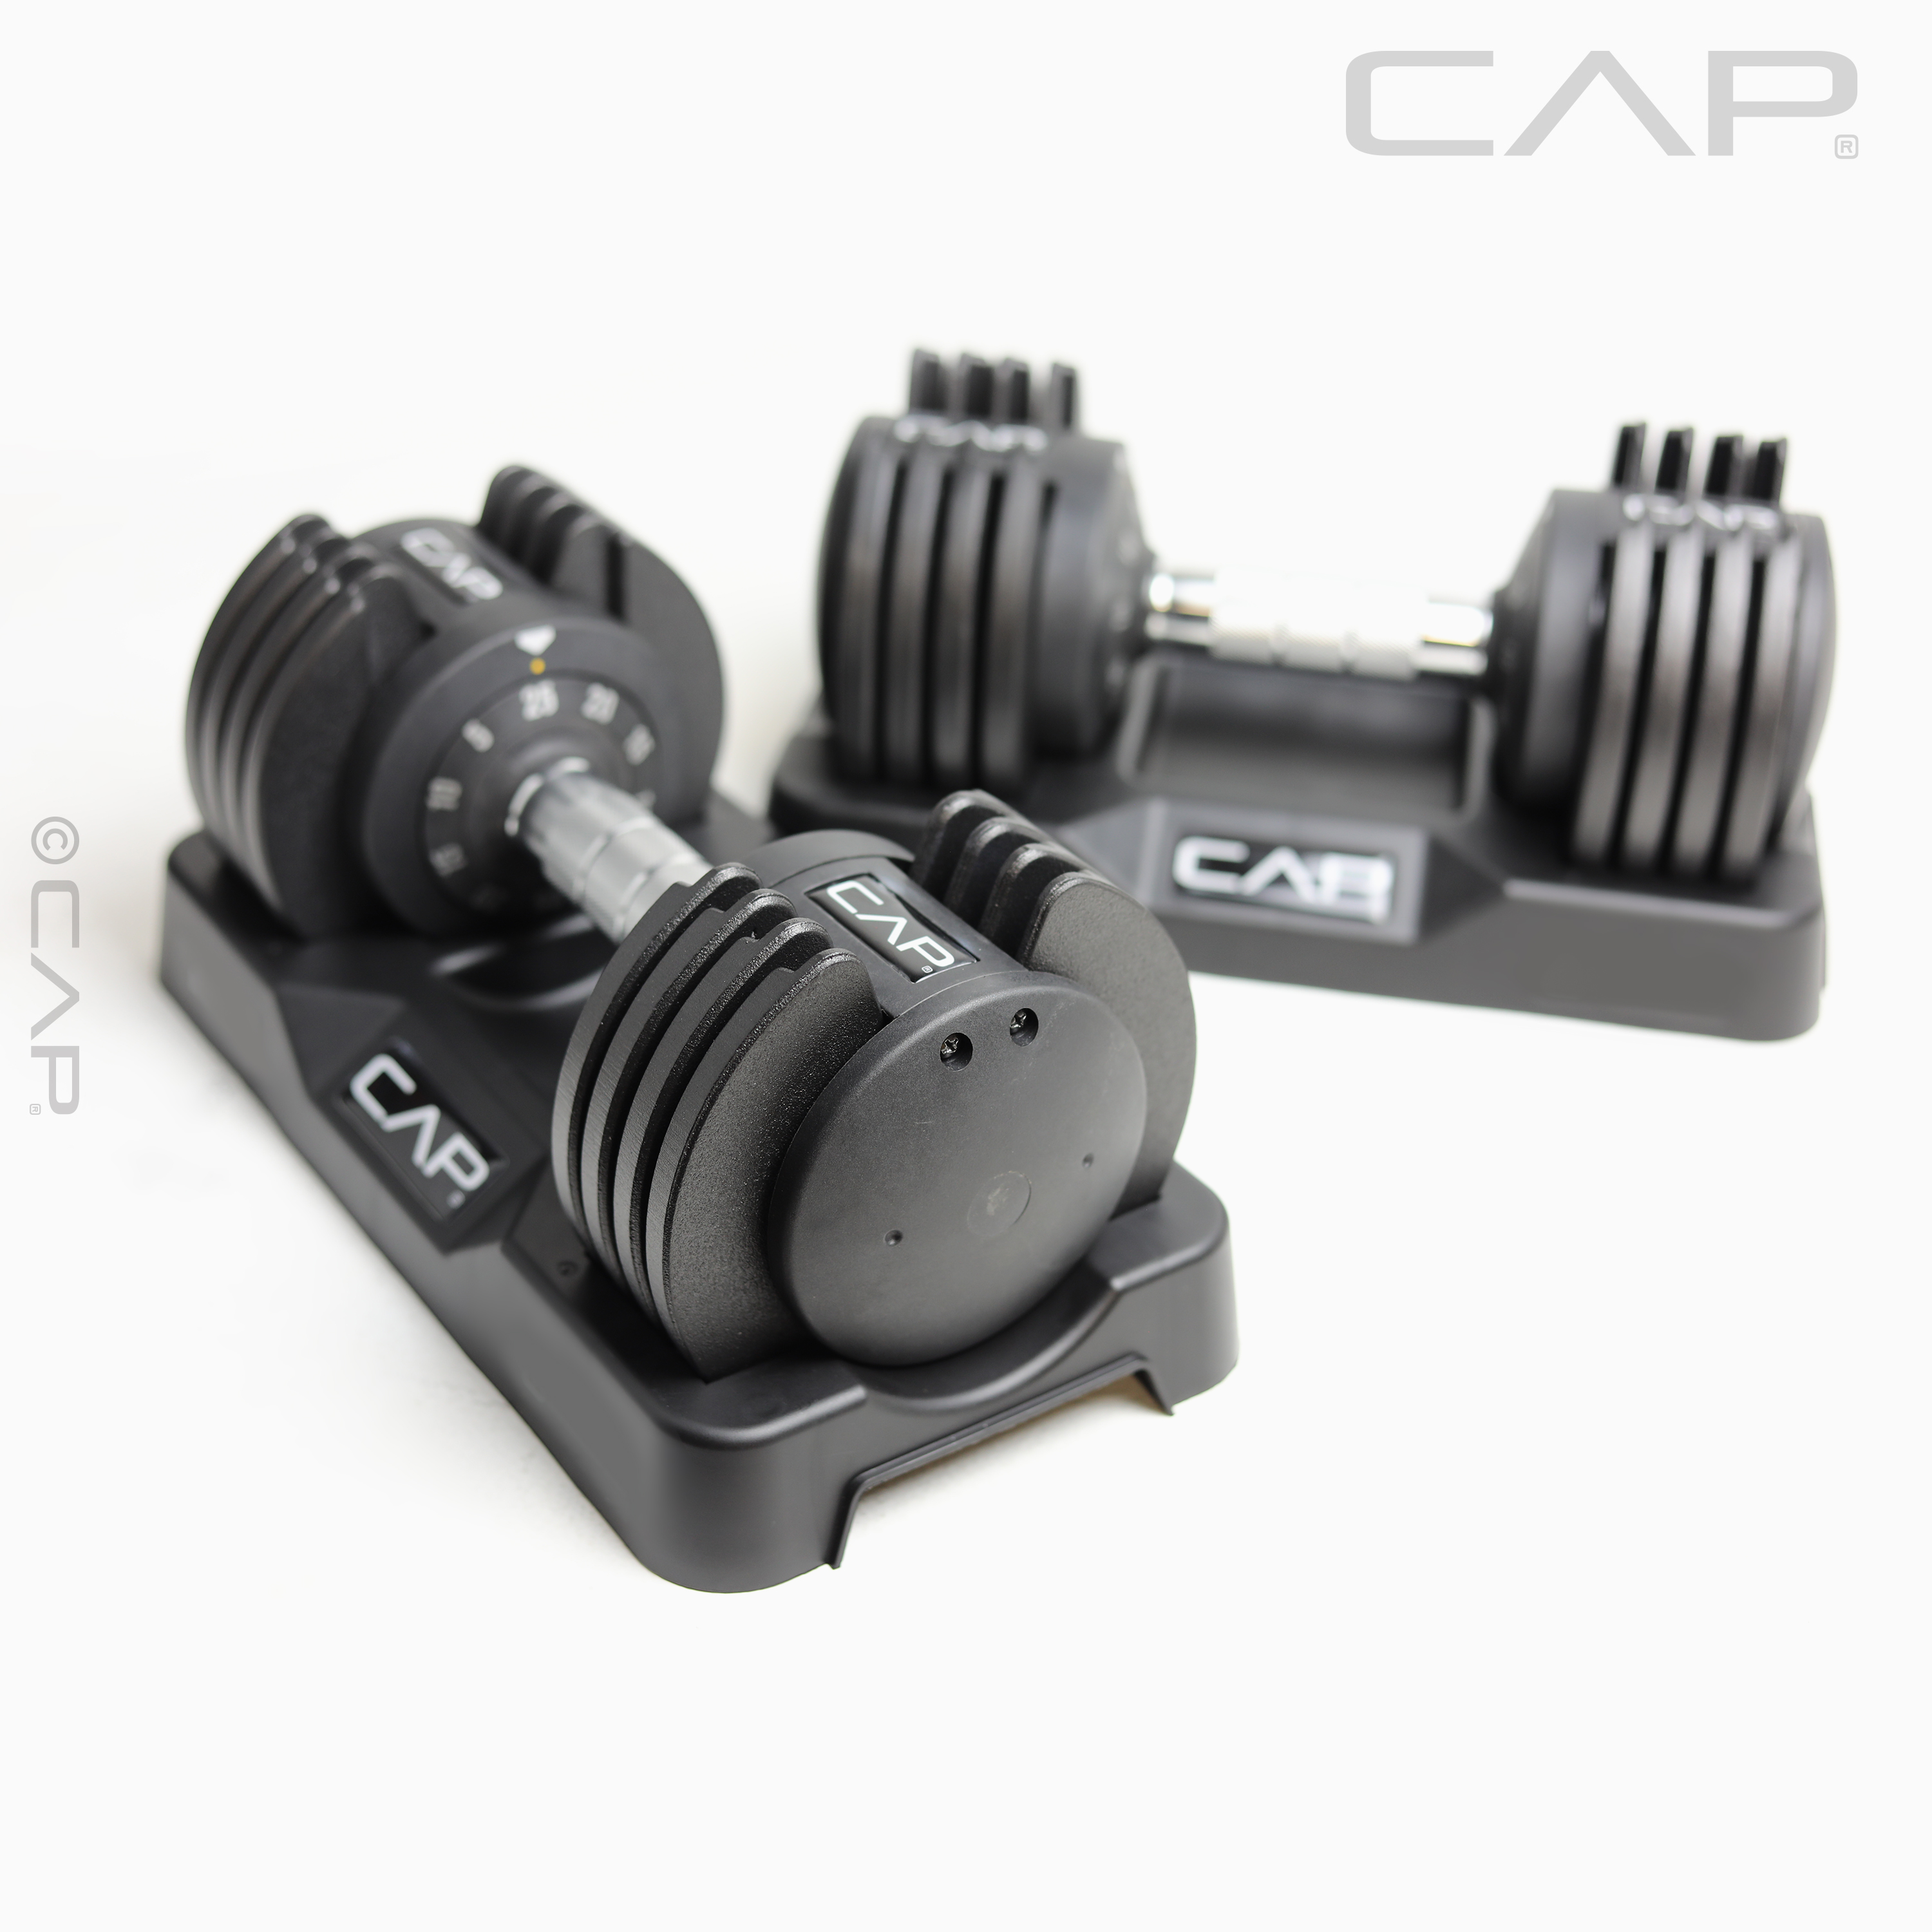 CAP Barbell 25 lb Adjustable Dumbbell Set, Quick Select Adjustability from 5-25 lb, Pair, Black - image 3 of 7